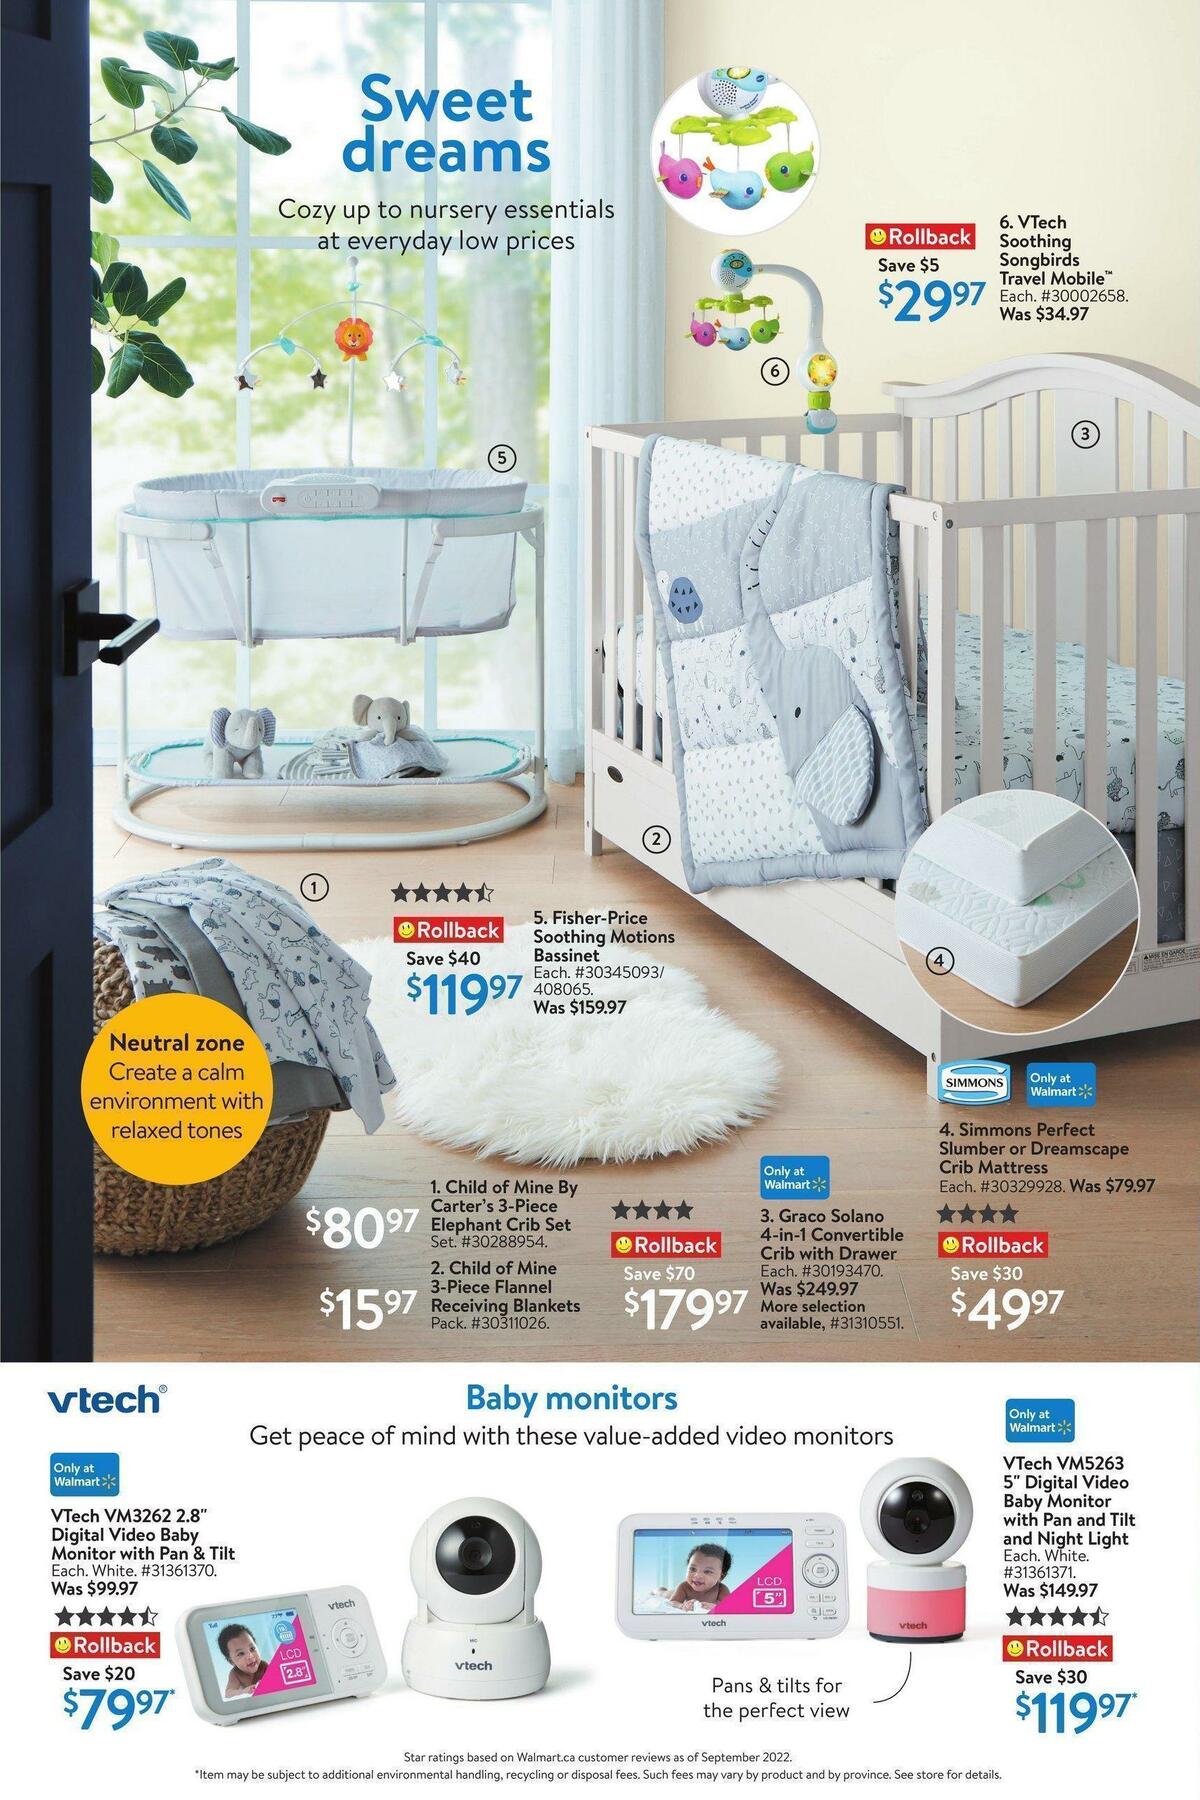 Walmart Everything Baby Flyer from October 20